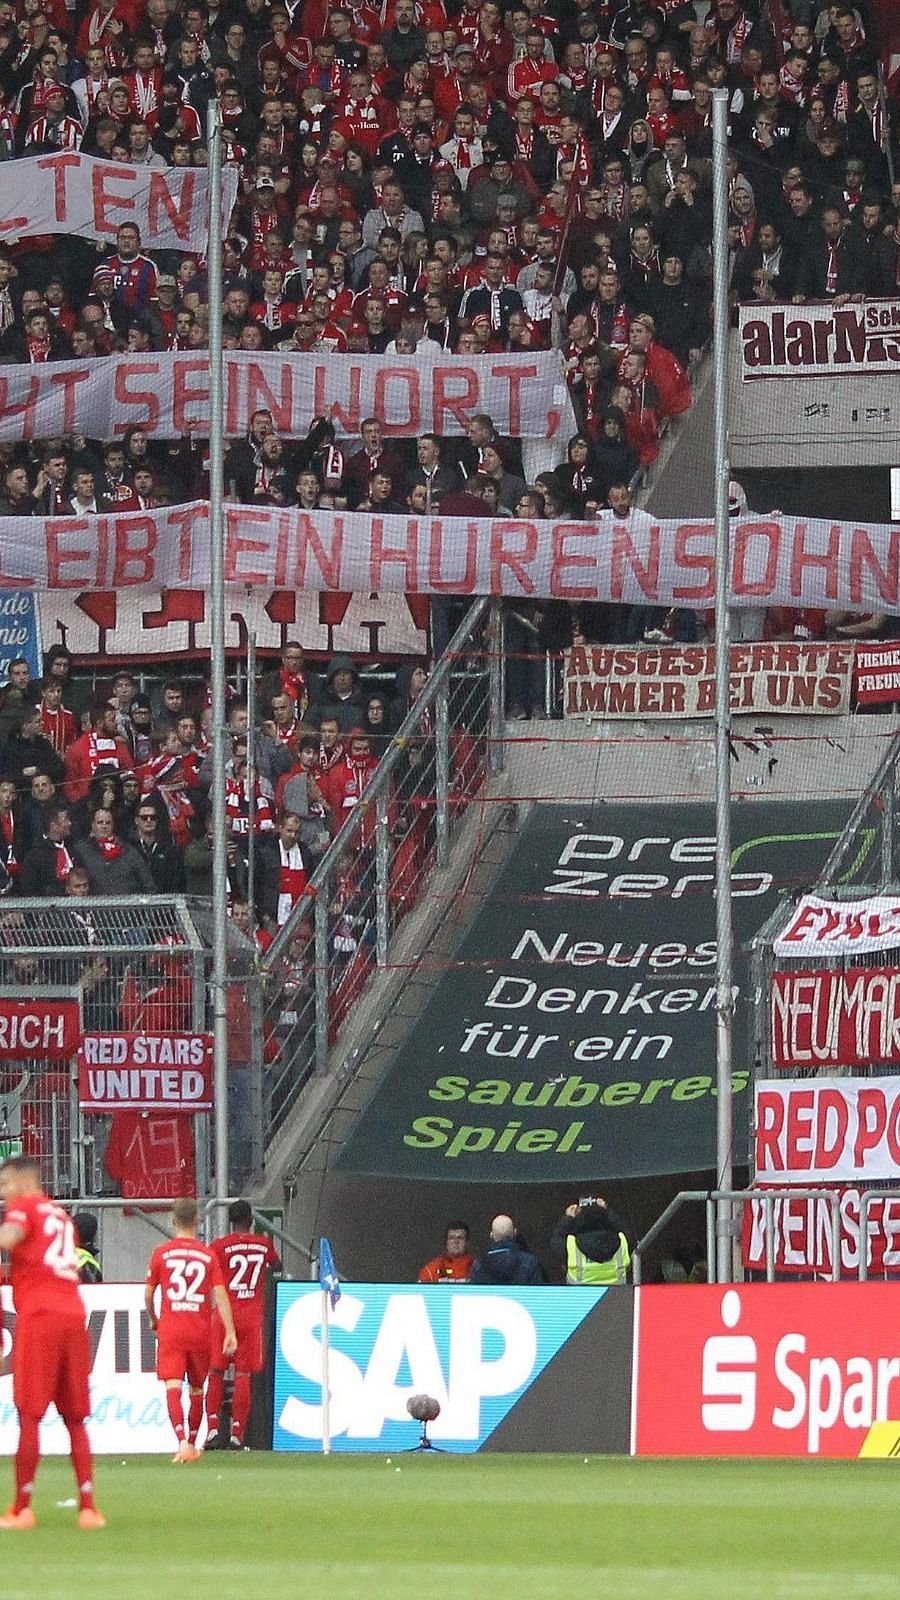 The Response To The Anti Hopp Banners Highlights More Systemic Problems In German Football Here S Why